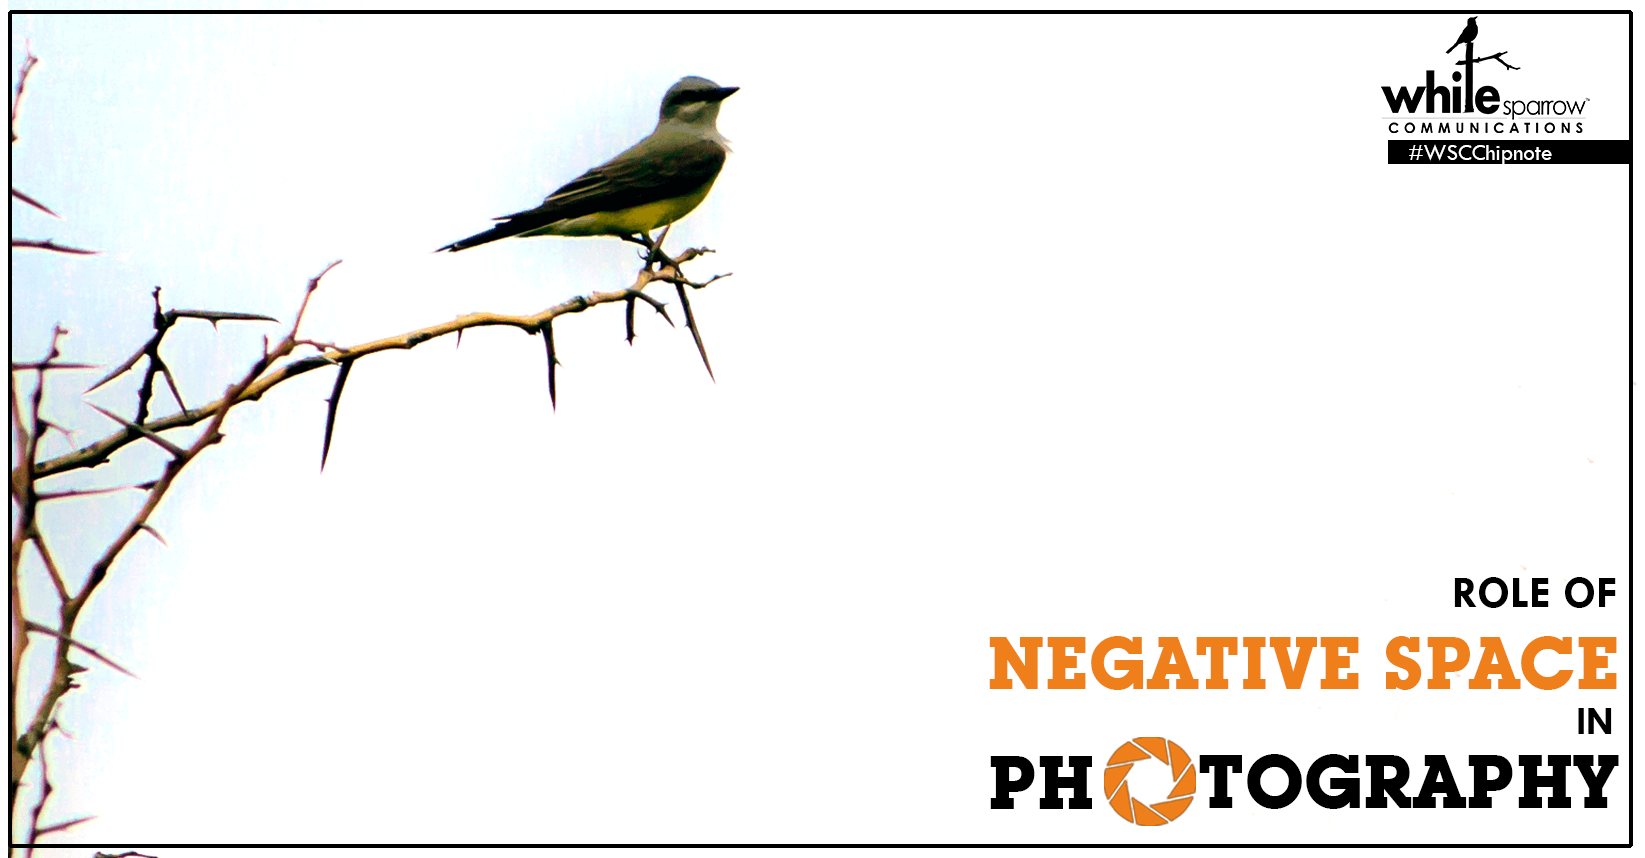 How to capitalize on Negative Space in Photography